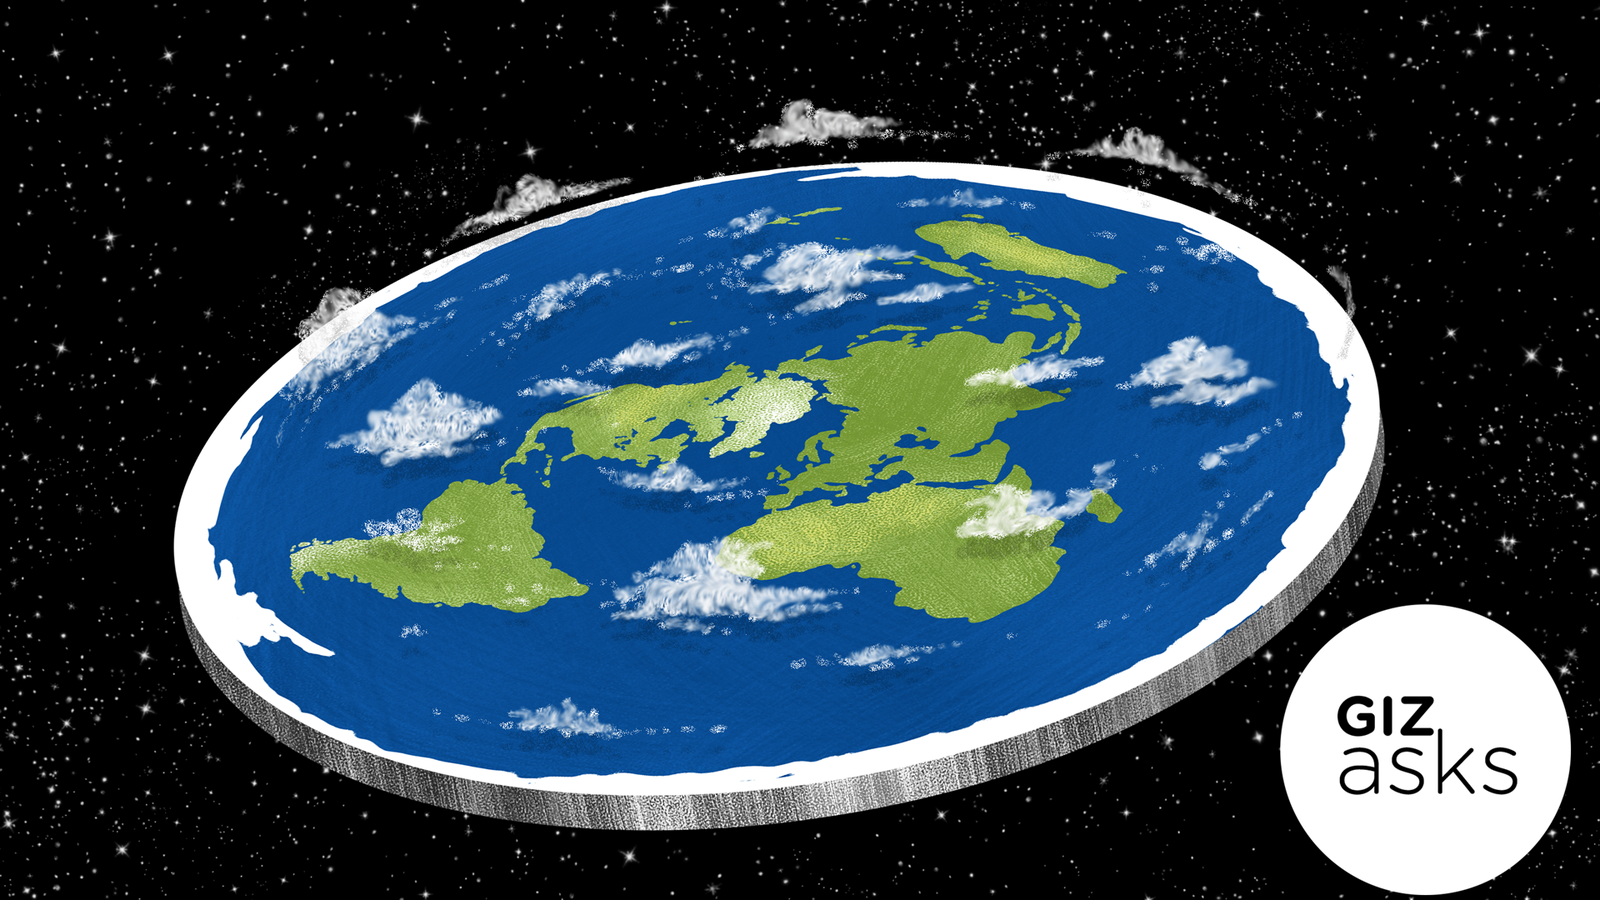 how much is 343 hours in days is the earth flat or round